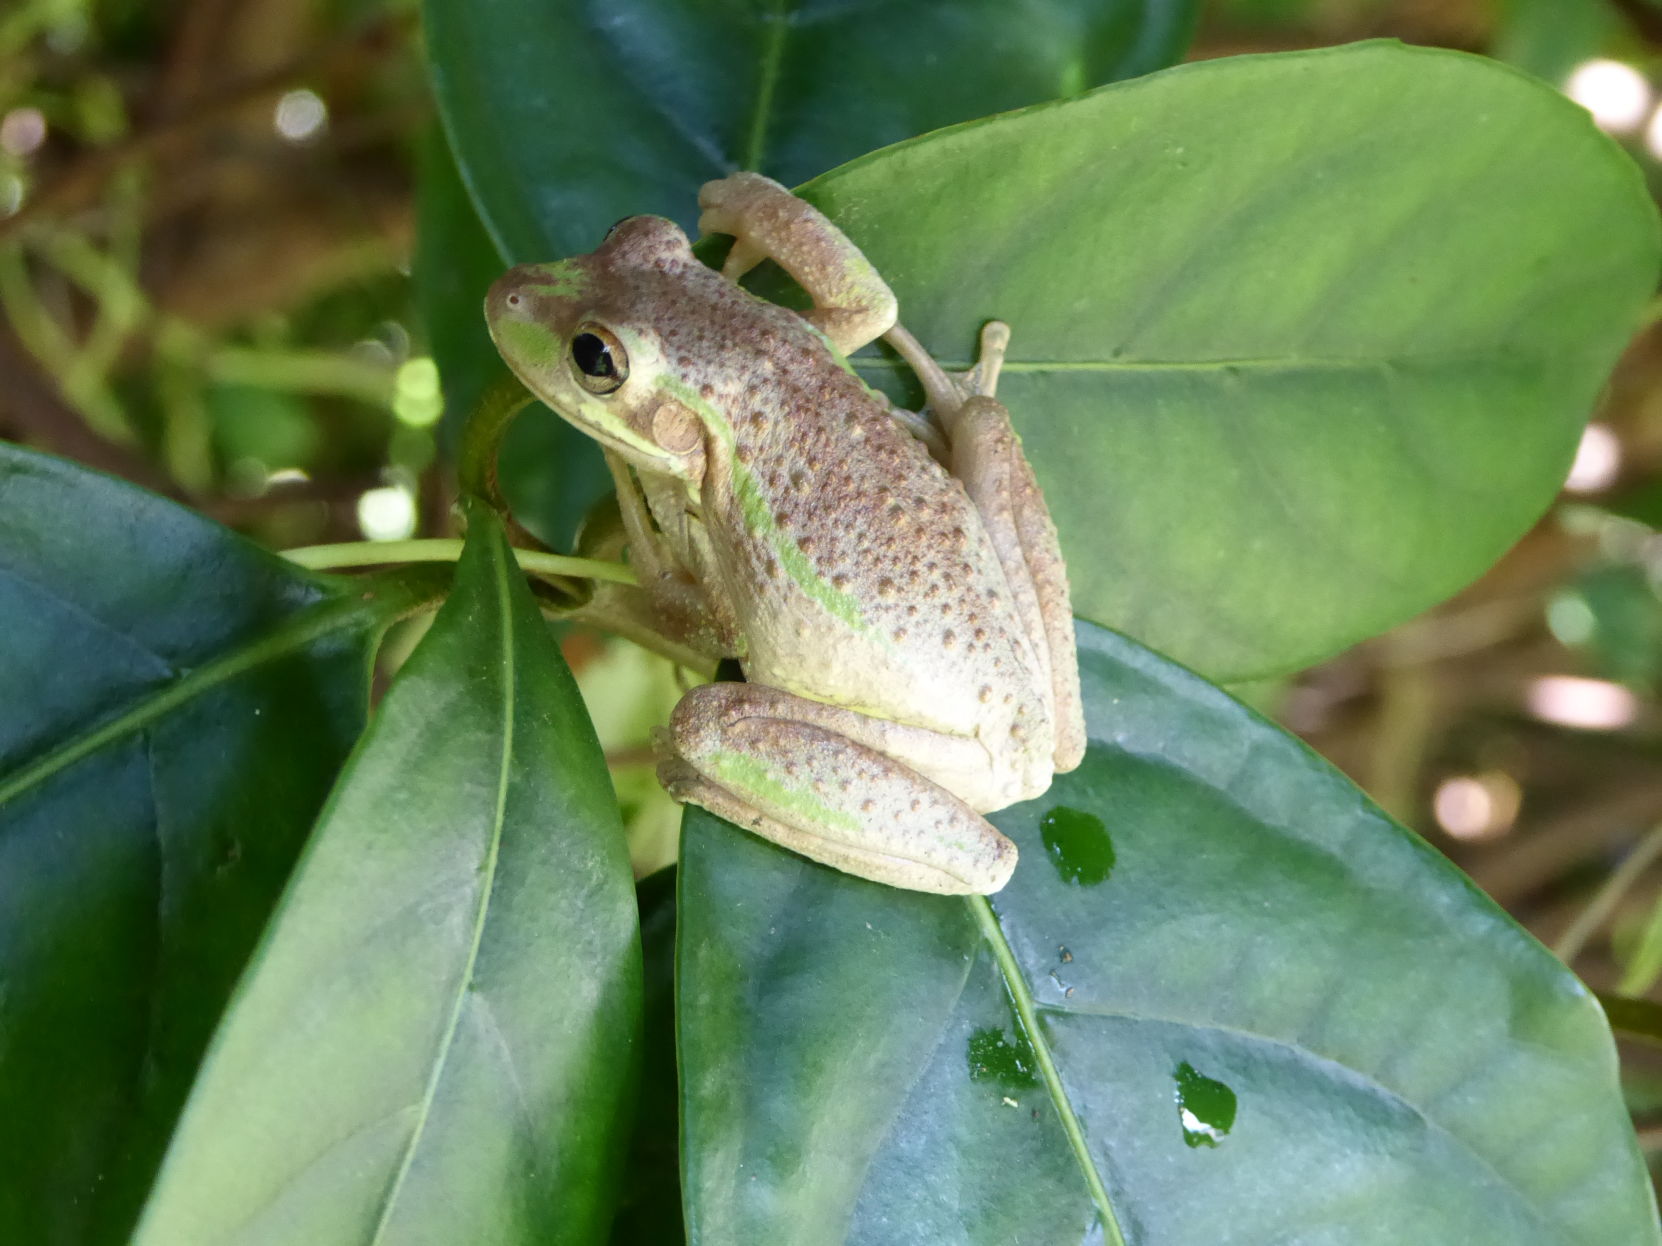 Invasive Cuban Tree Frogs in Florida, Real Estate